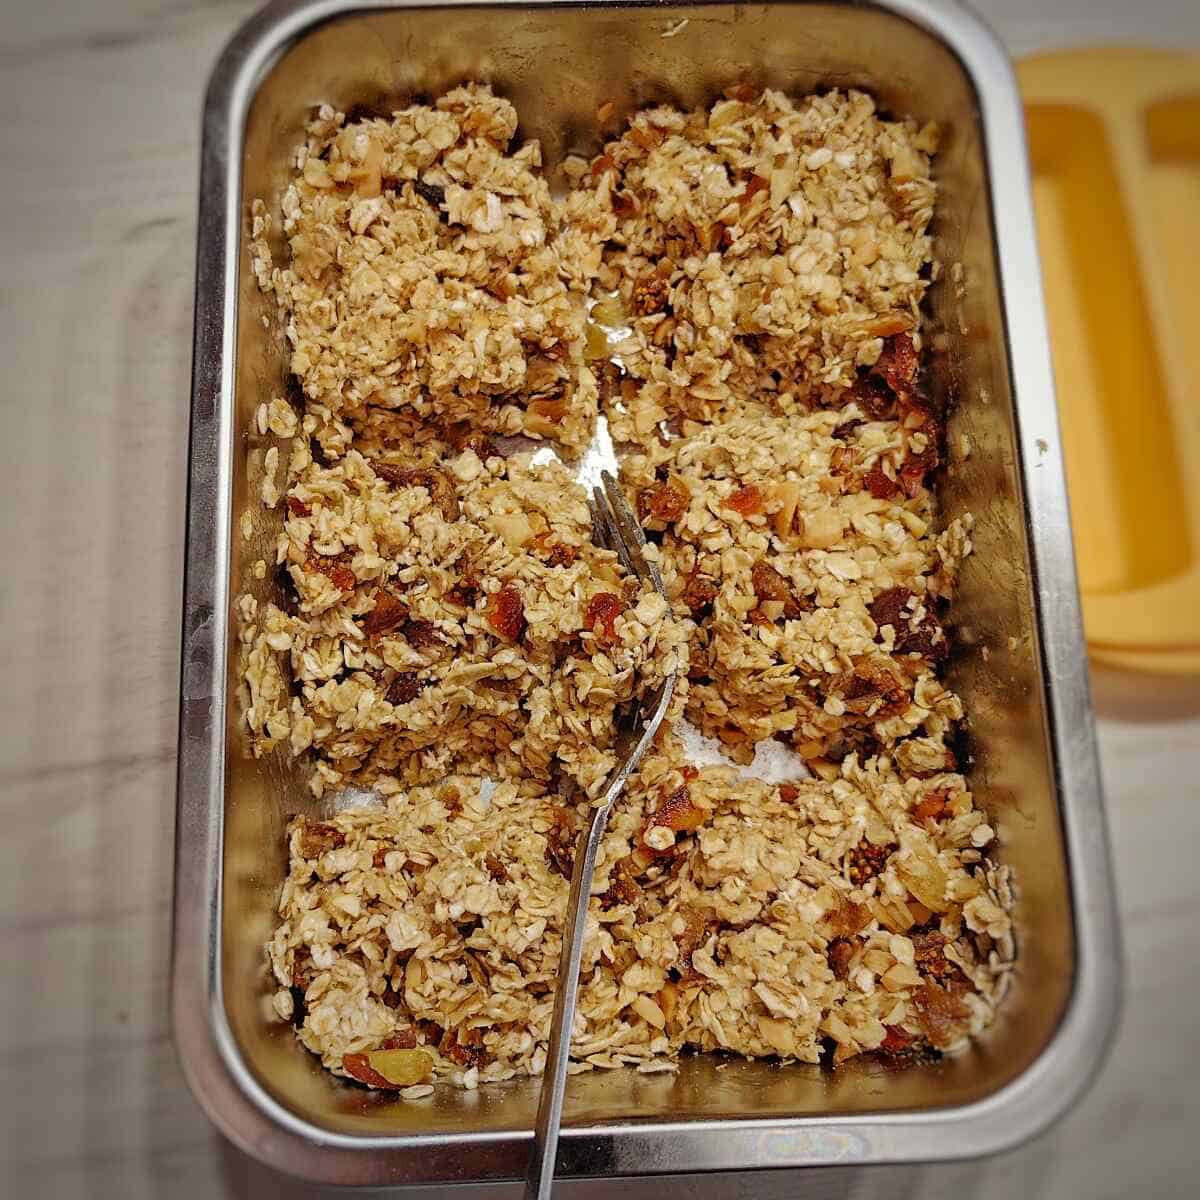 banana mixture with chopped fruits, nuts and seeds